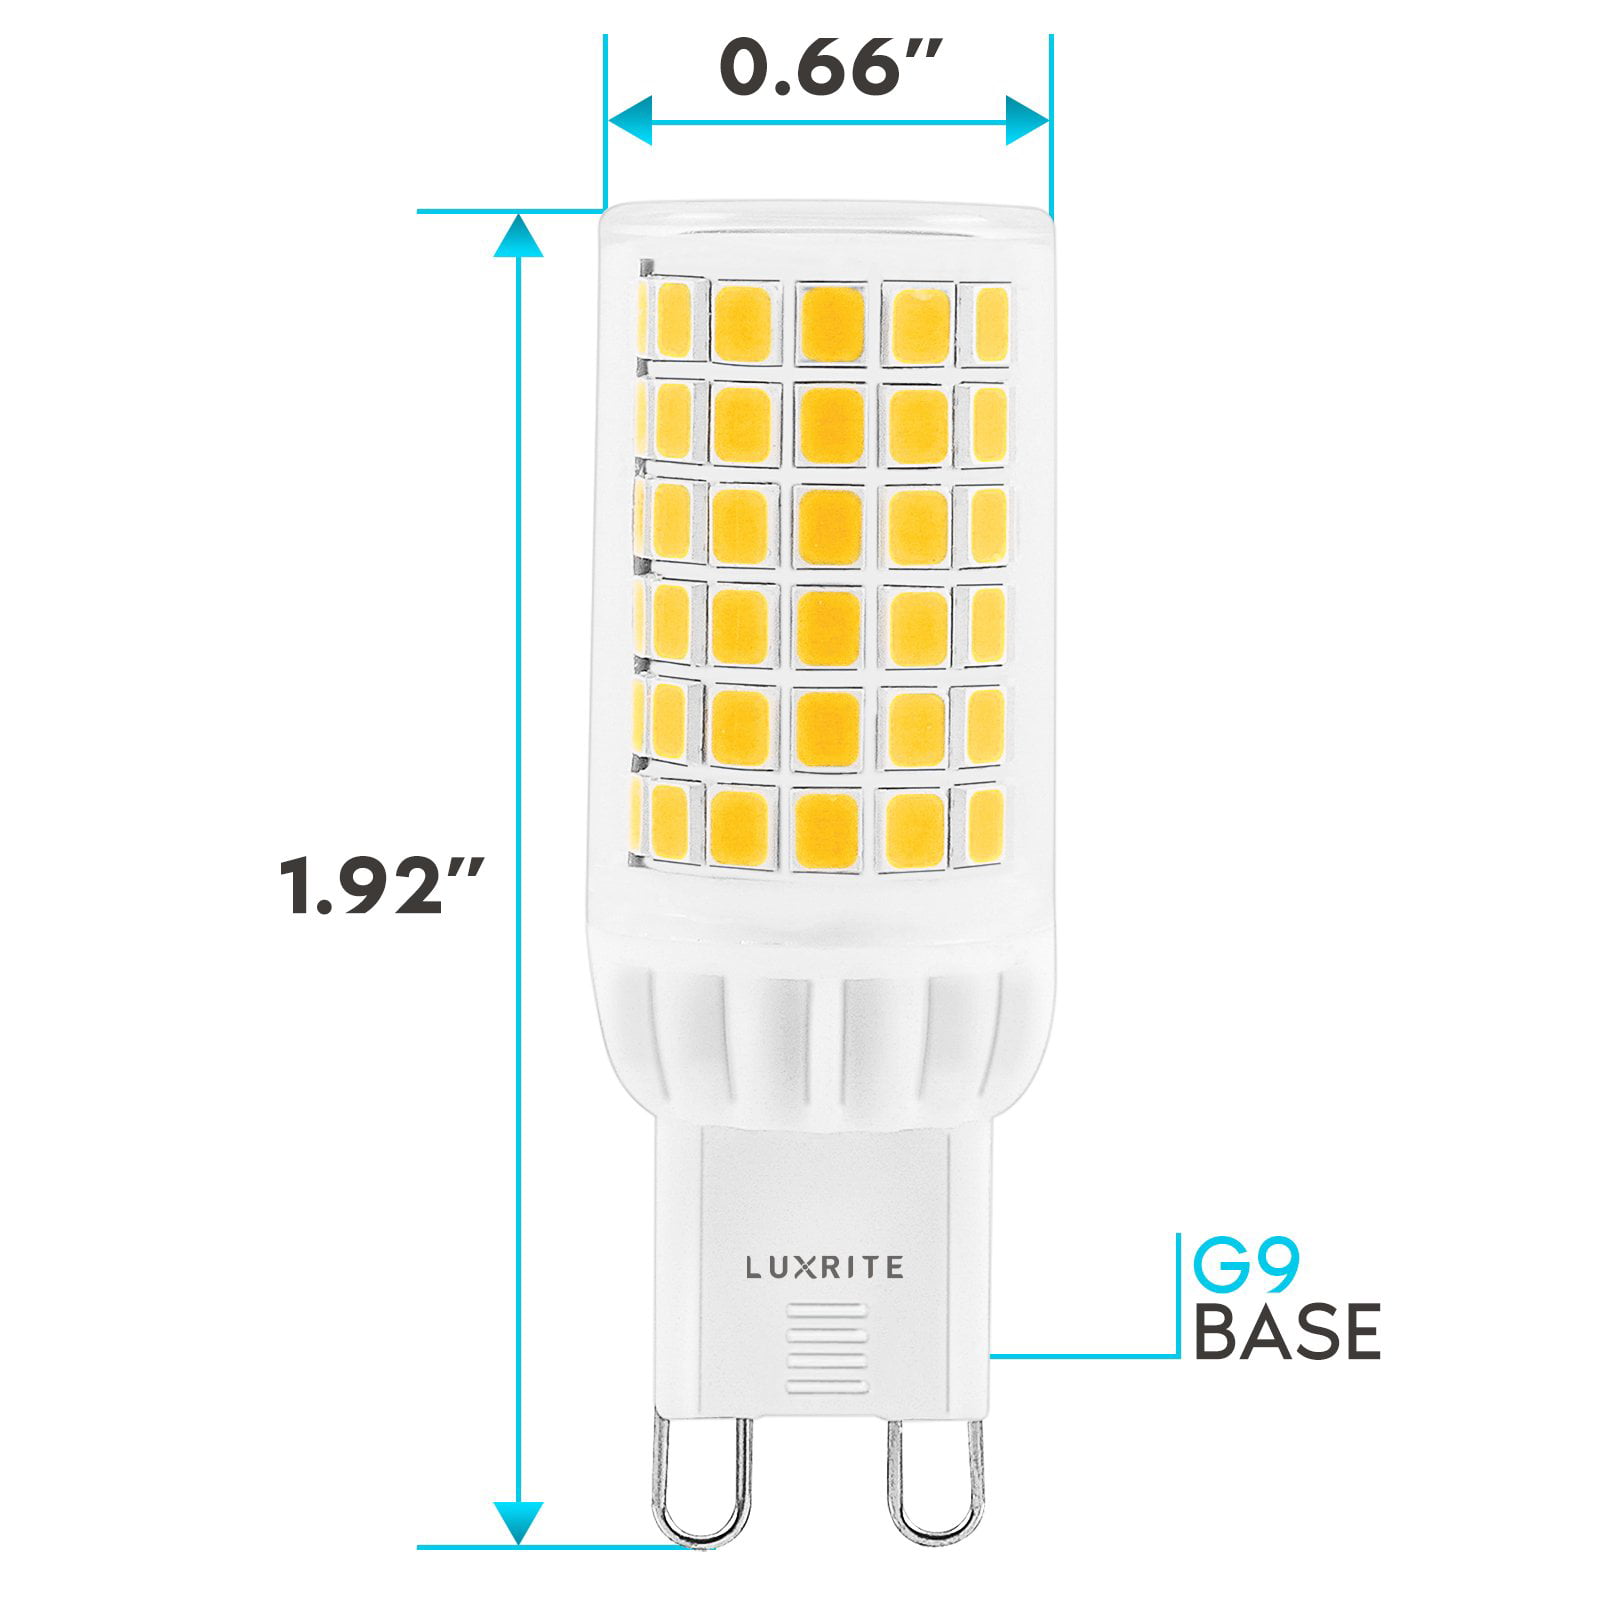 Luxrite G9 LED Bulb Dimmable, 5W=45W T4 Halogen Equivalent, 6500K Daylight,  500 Lumens, Ceramic G9 Bi-Pin Base, UL Listed 5 Pack 